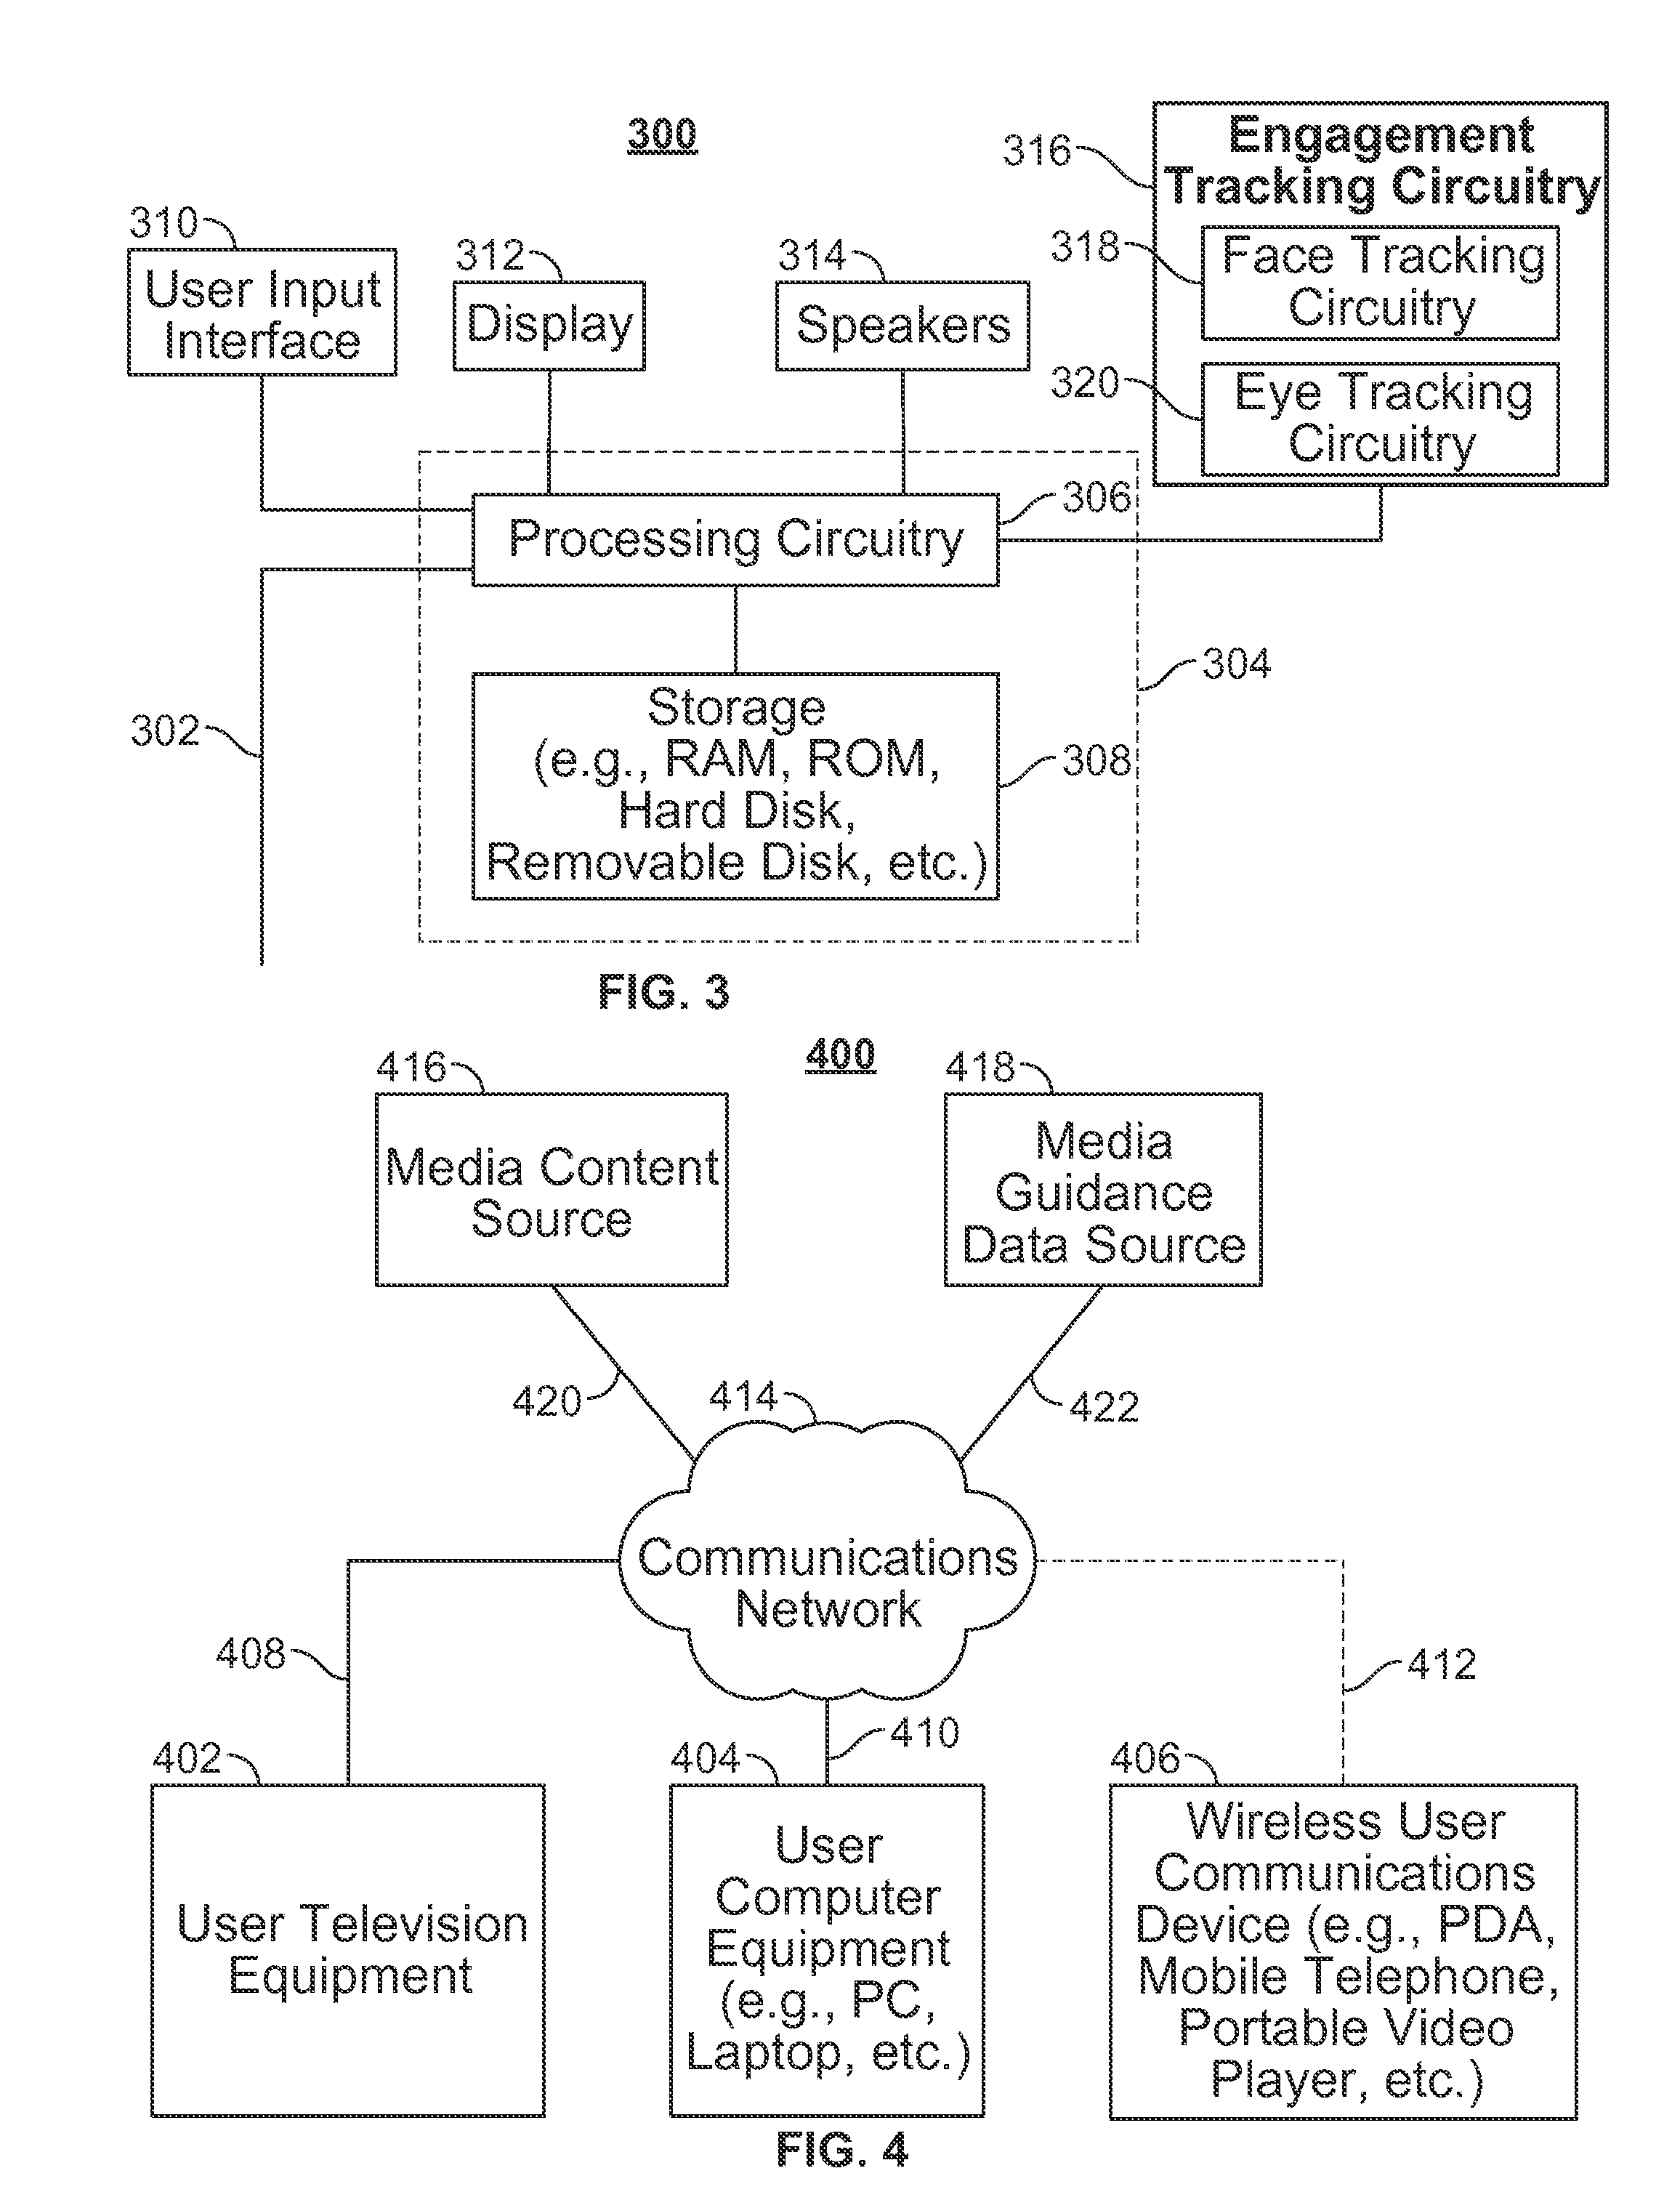 Systems and methods for enabling parental controls based on user engagement with a media device